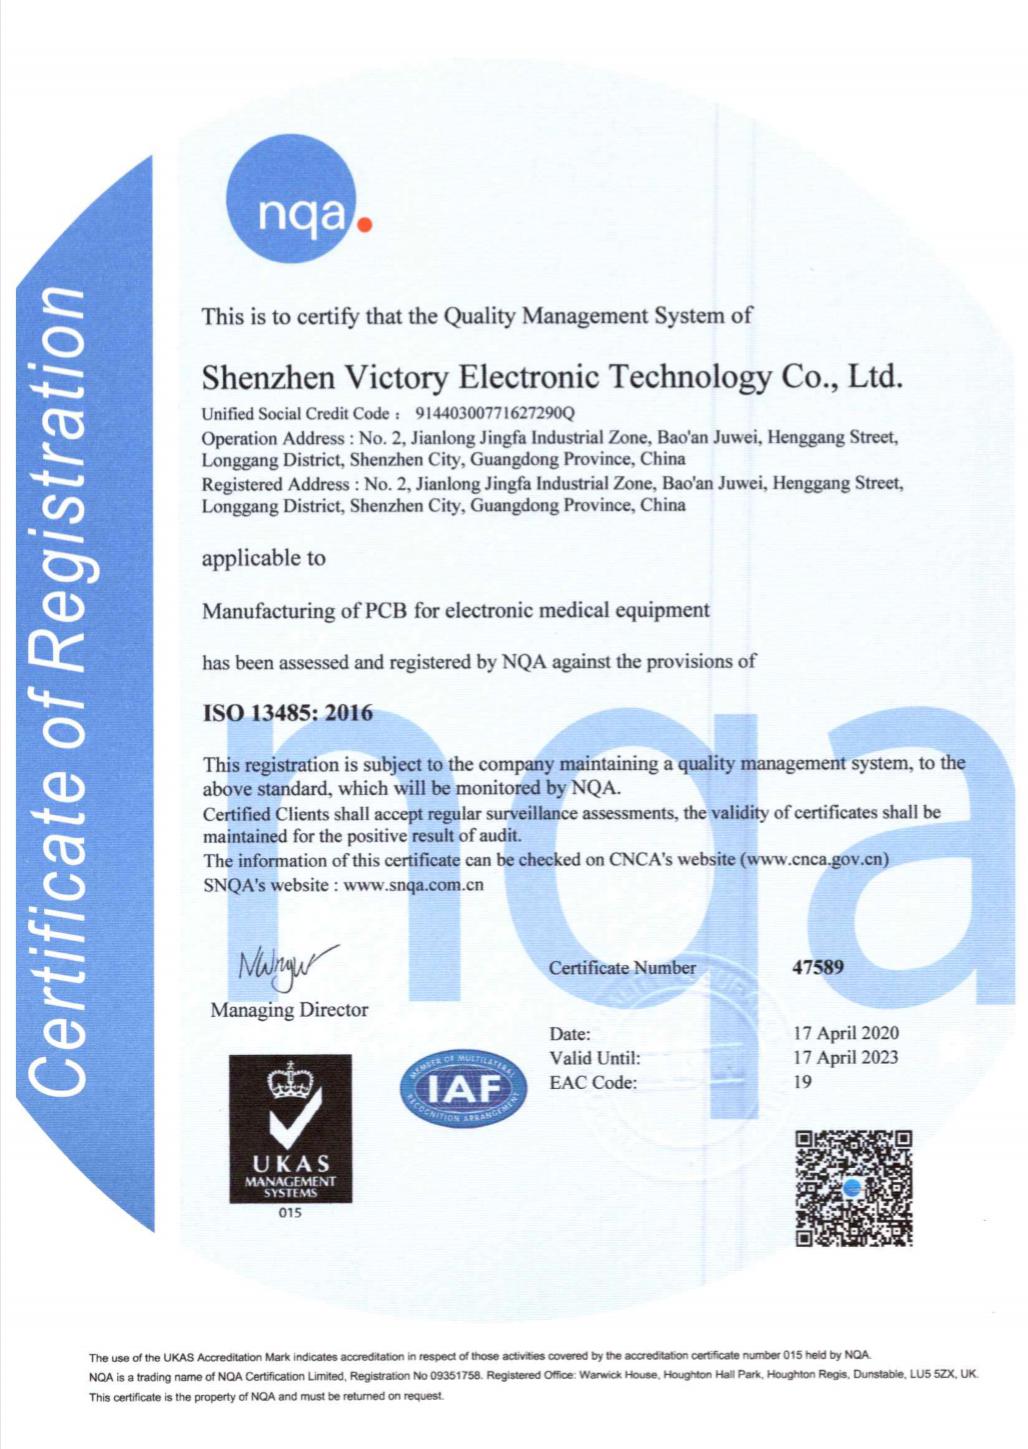 Victory Electronic Technology Gained ISO 13485:2016 System Certification